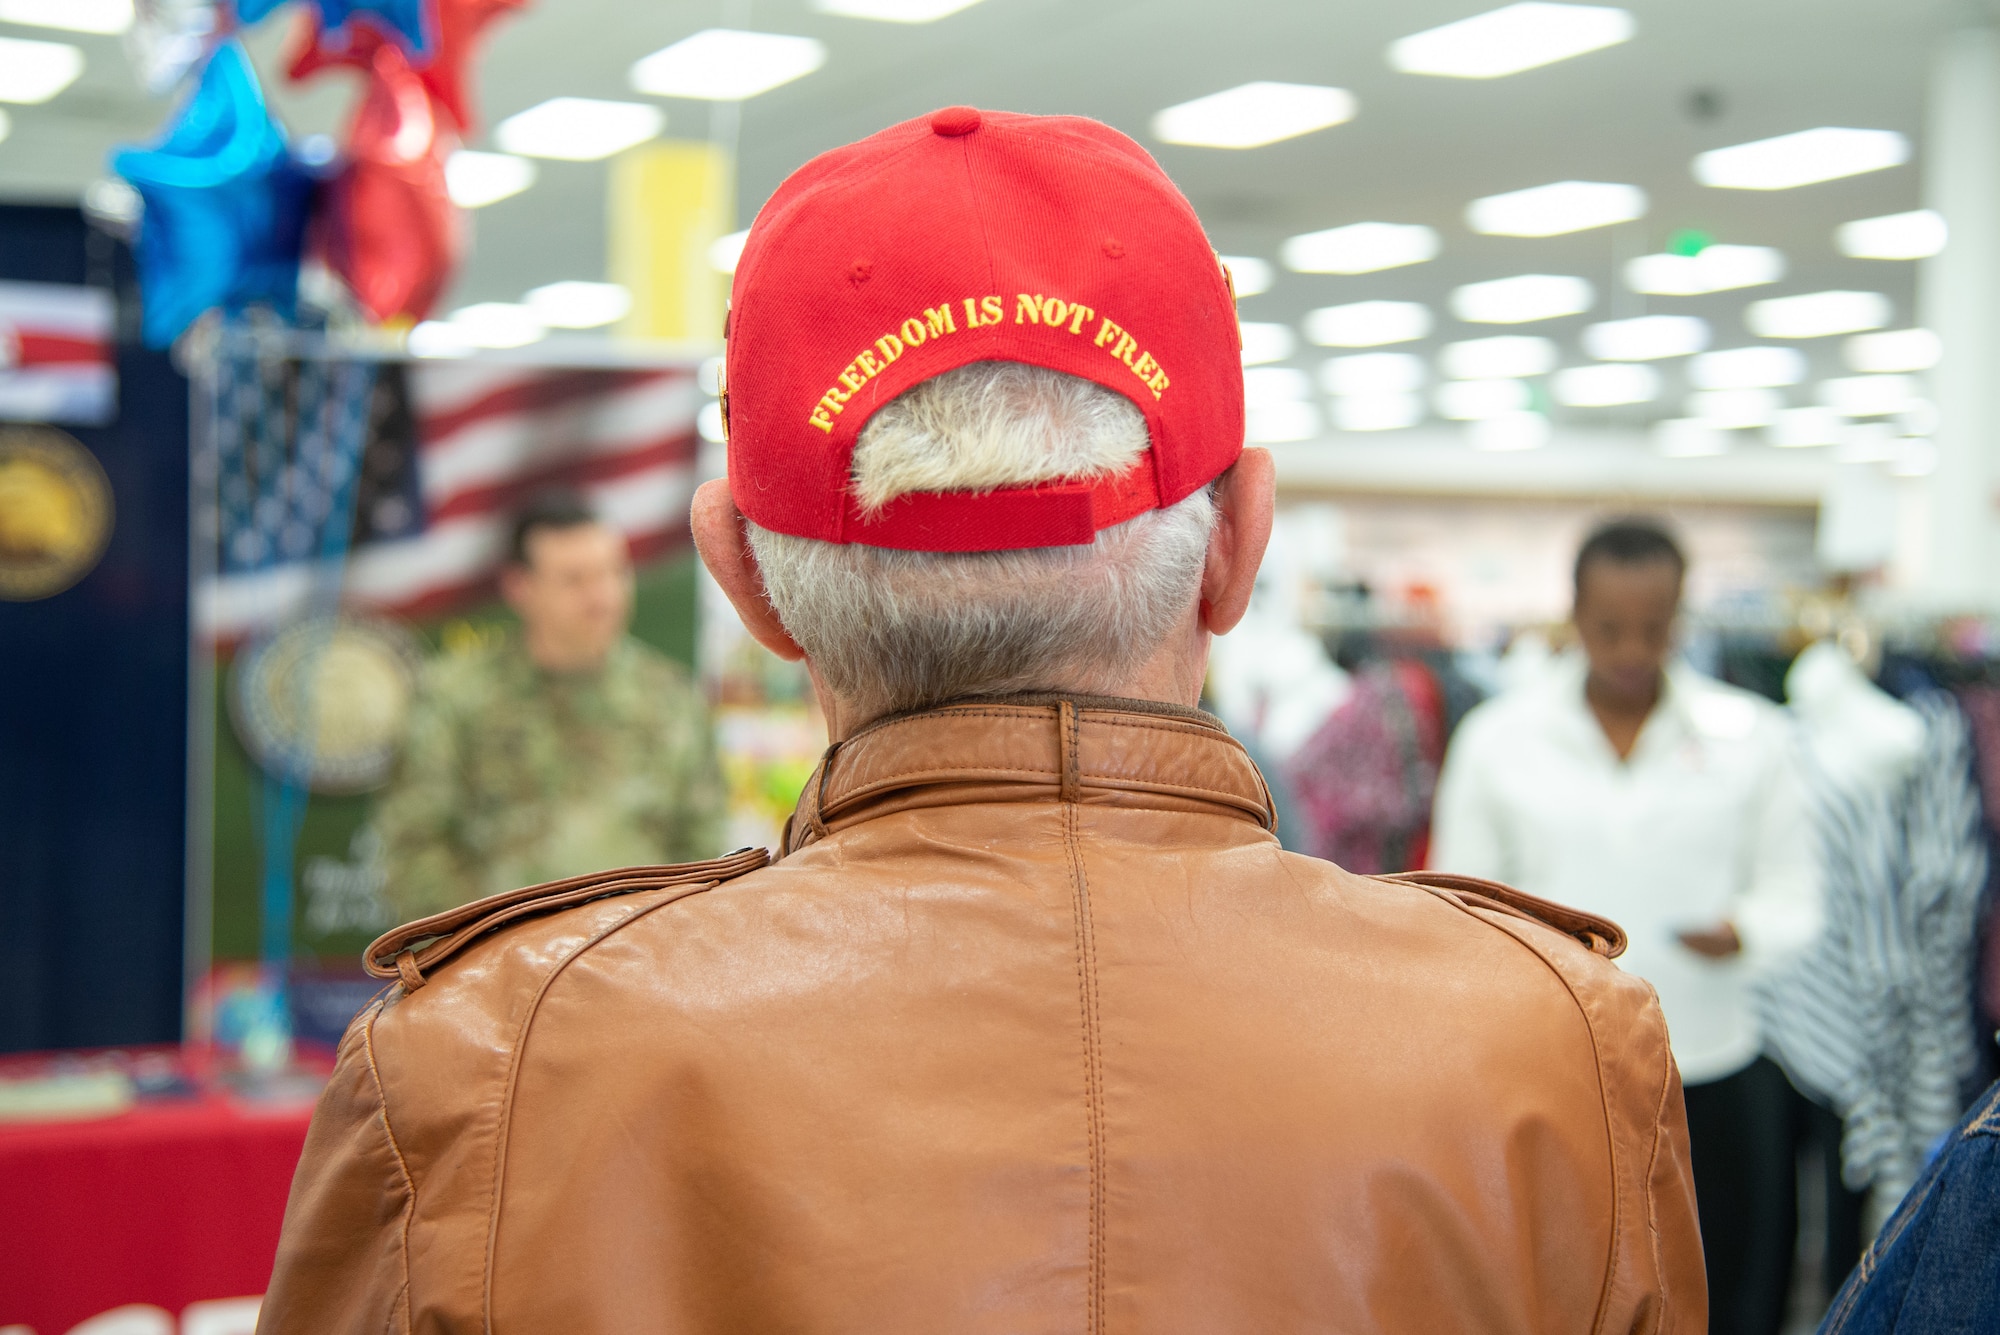 United States Navy veteran Bill Kelley stands by as President Donald Trump's proclamation is read commemorating the anniversary of the ending of the Vietnam War during the Vietnam Veteran Pinning, March 29, 2019, at the Main Exchange at Hill Air Force Base, Utah. Base Exchanges around the world hosted pinning ceremonies to honor Vietnam Veterans on Vietnam Veterans Day. Vietnam Veterans Day is celebrated every March 29 to honor the courage and sacrifice of those who served in the Vietnam War. (U.S. Air Force photo by Cynthia Griggs)